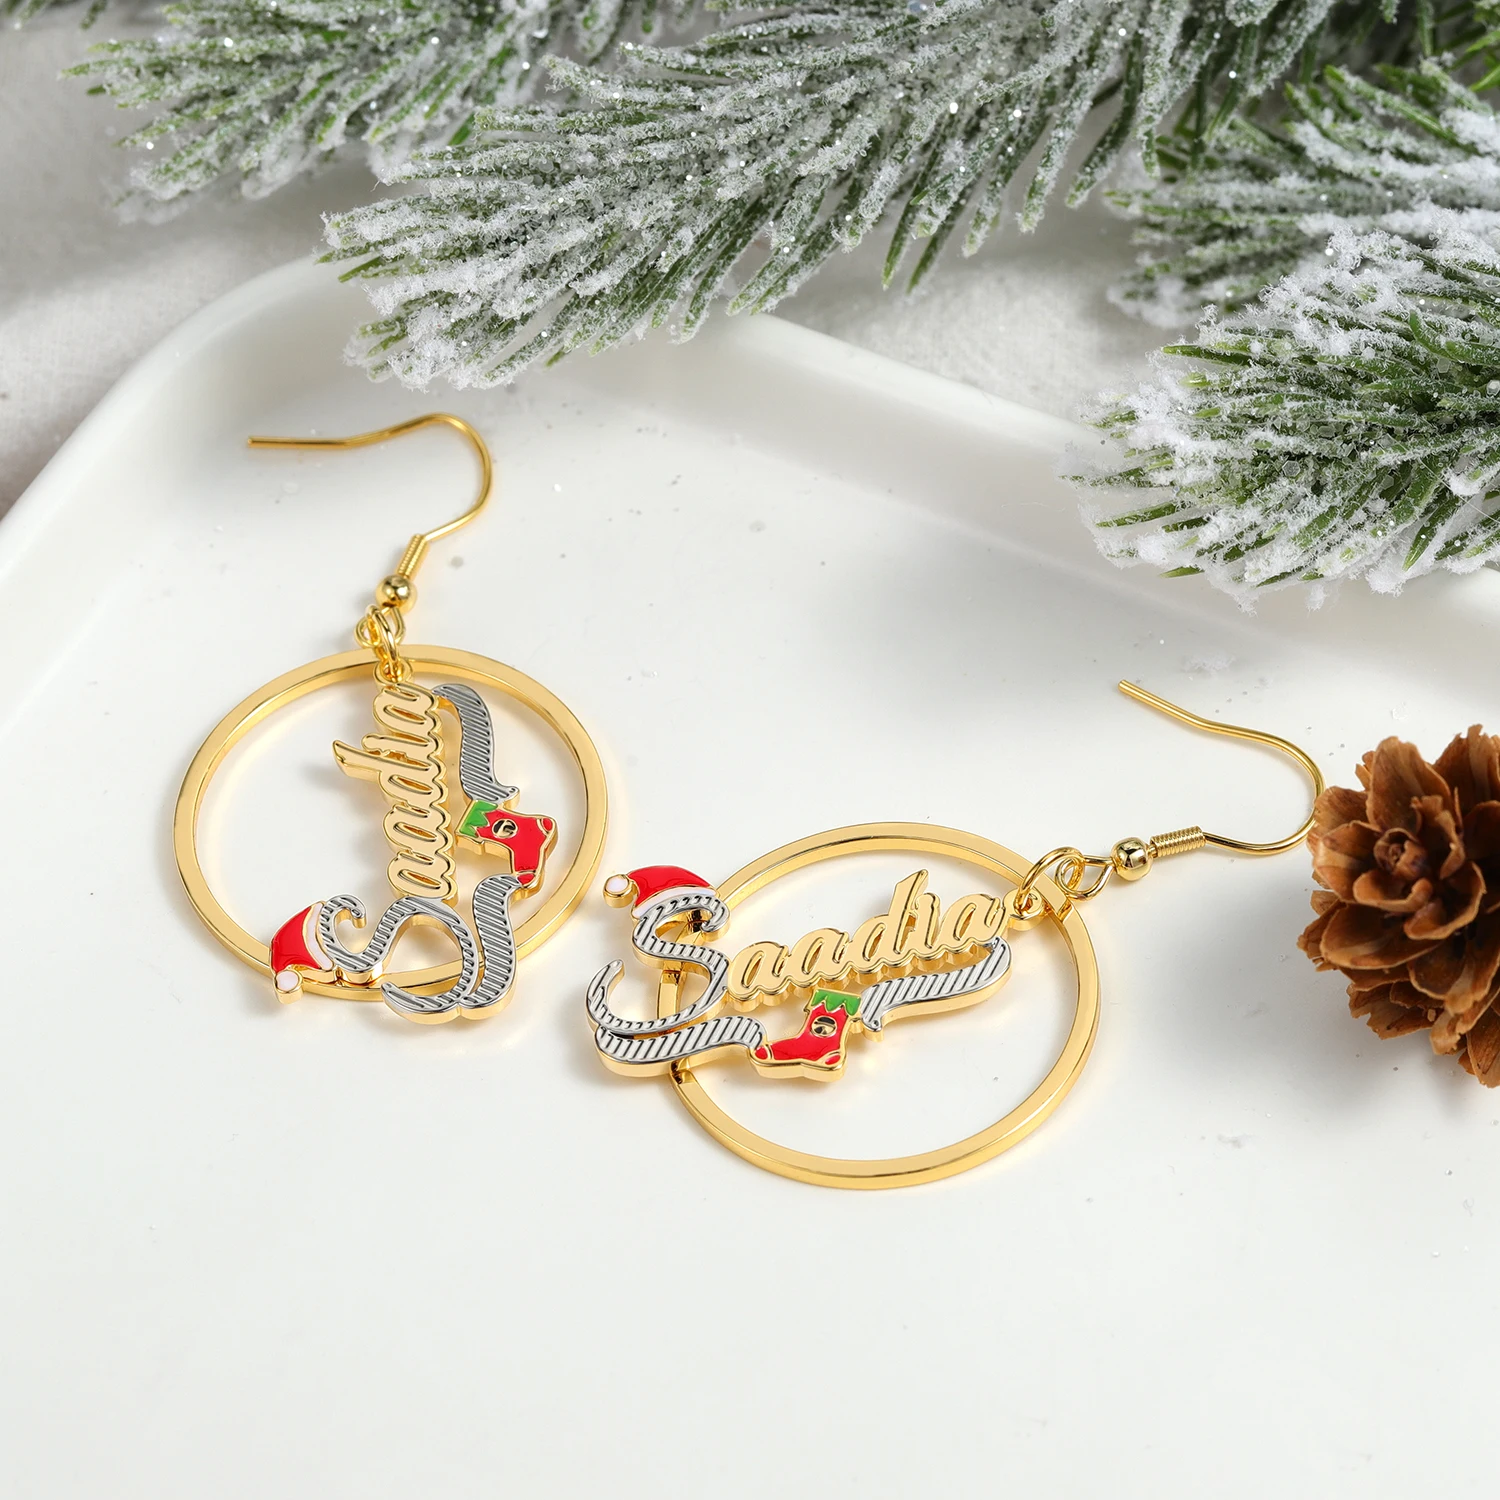 New Christmas Gift Customized Earrings Name 18K Gold-Plated Two Tone Gold Plated Hoop Personalized Name Earrings for Women Girls earrings christmas tree rhinestone alloy earrings in silver size one size